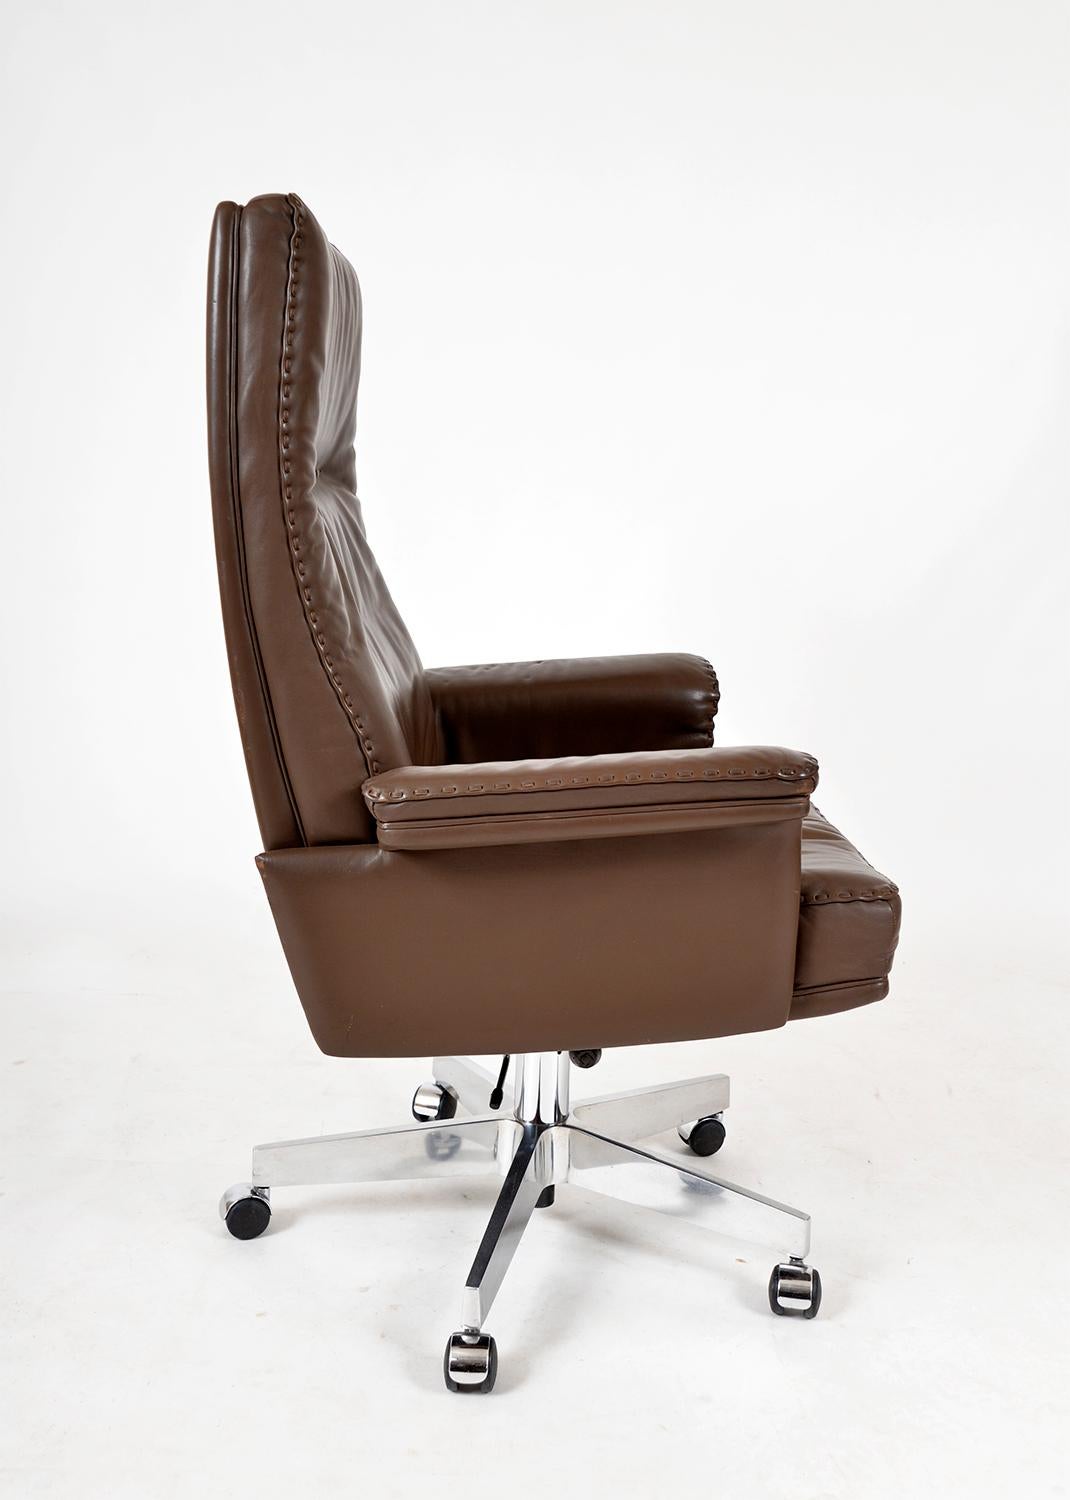 De Sede has been creating premium quality leather furniture in Switzerland since the mid-1960s. This fabulous example of a De Sede DS 35 Executive office chair in dark brown leather, is in wonderful supple condition and shows only slight signs of